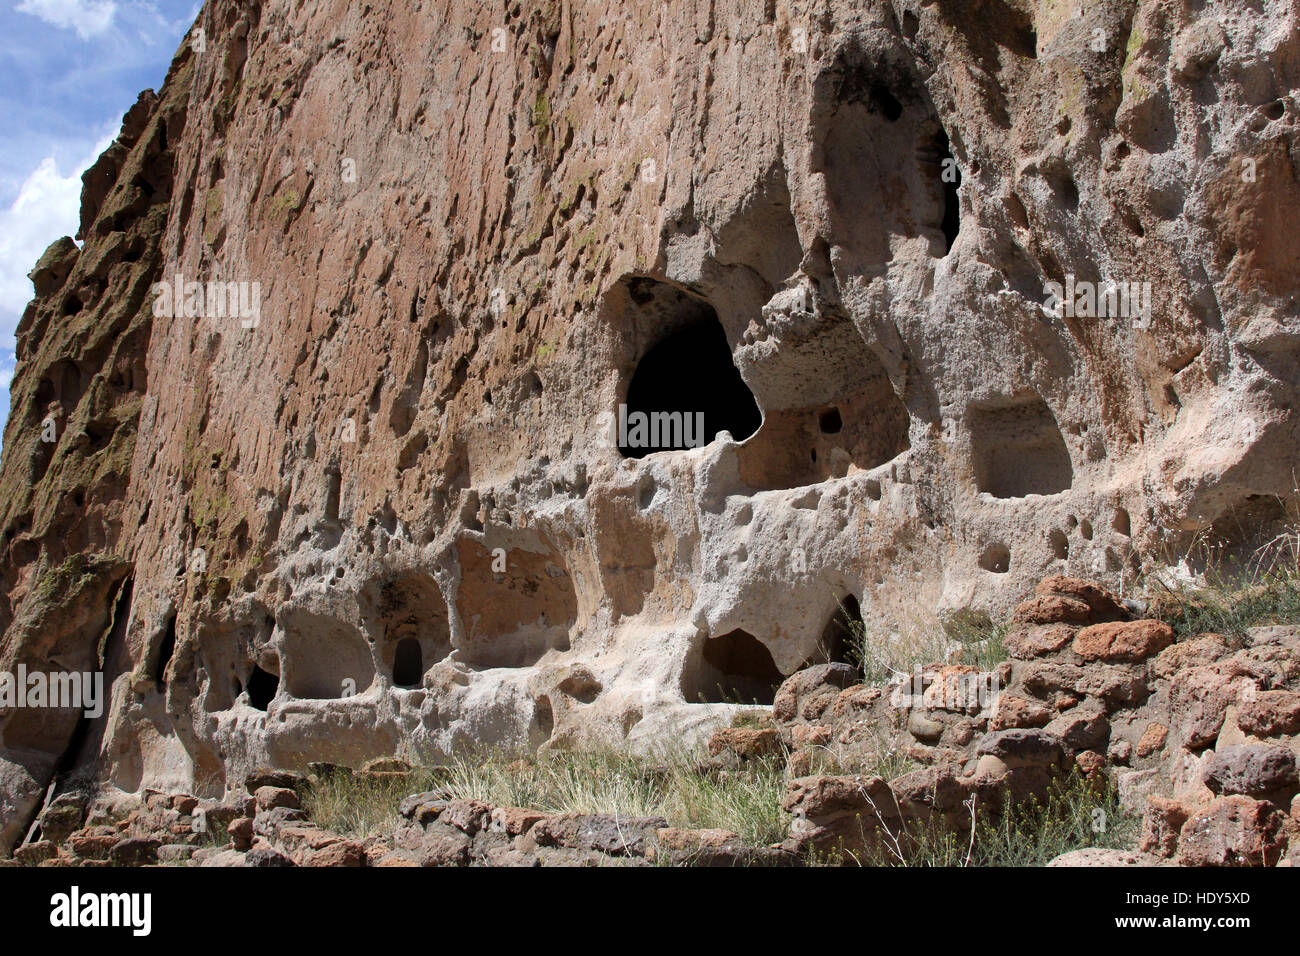 Bandelier cliff dwellings carved out of the cliffs by early pueblo people of the southwest creating a system of living spaces. Stock Photo